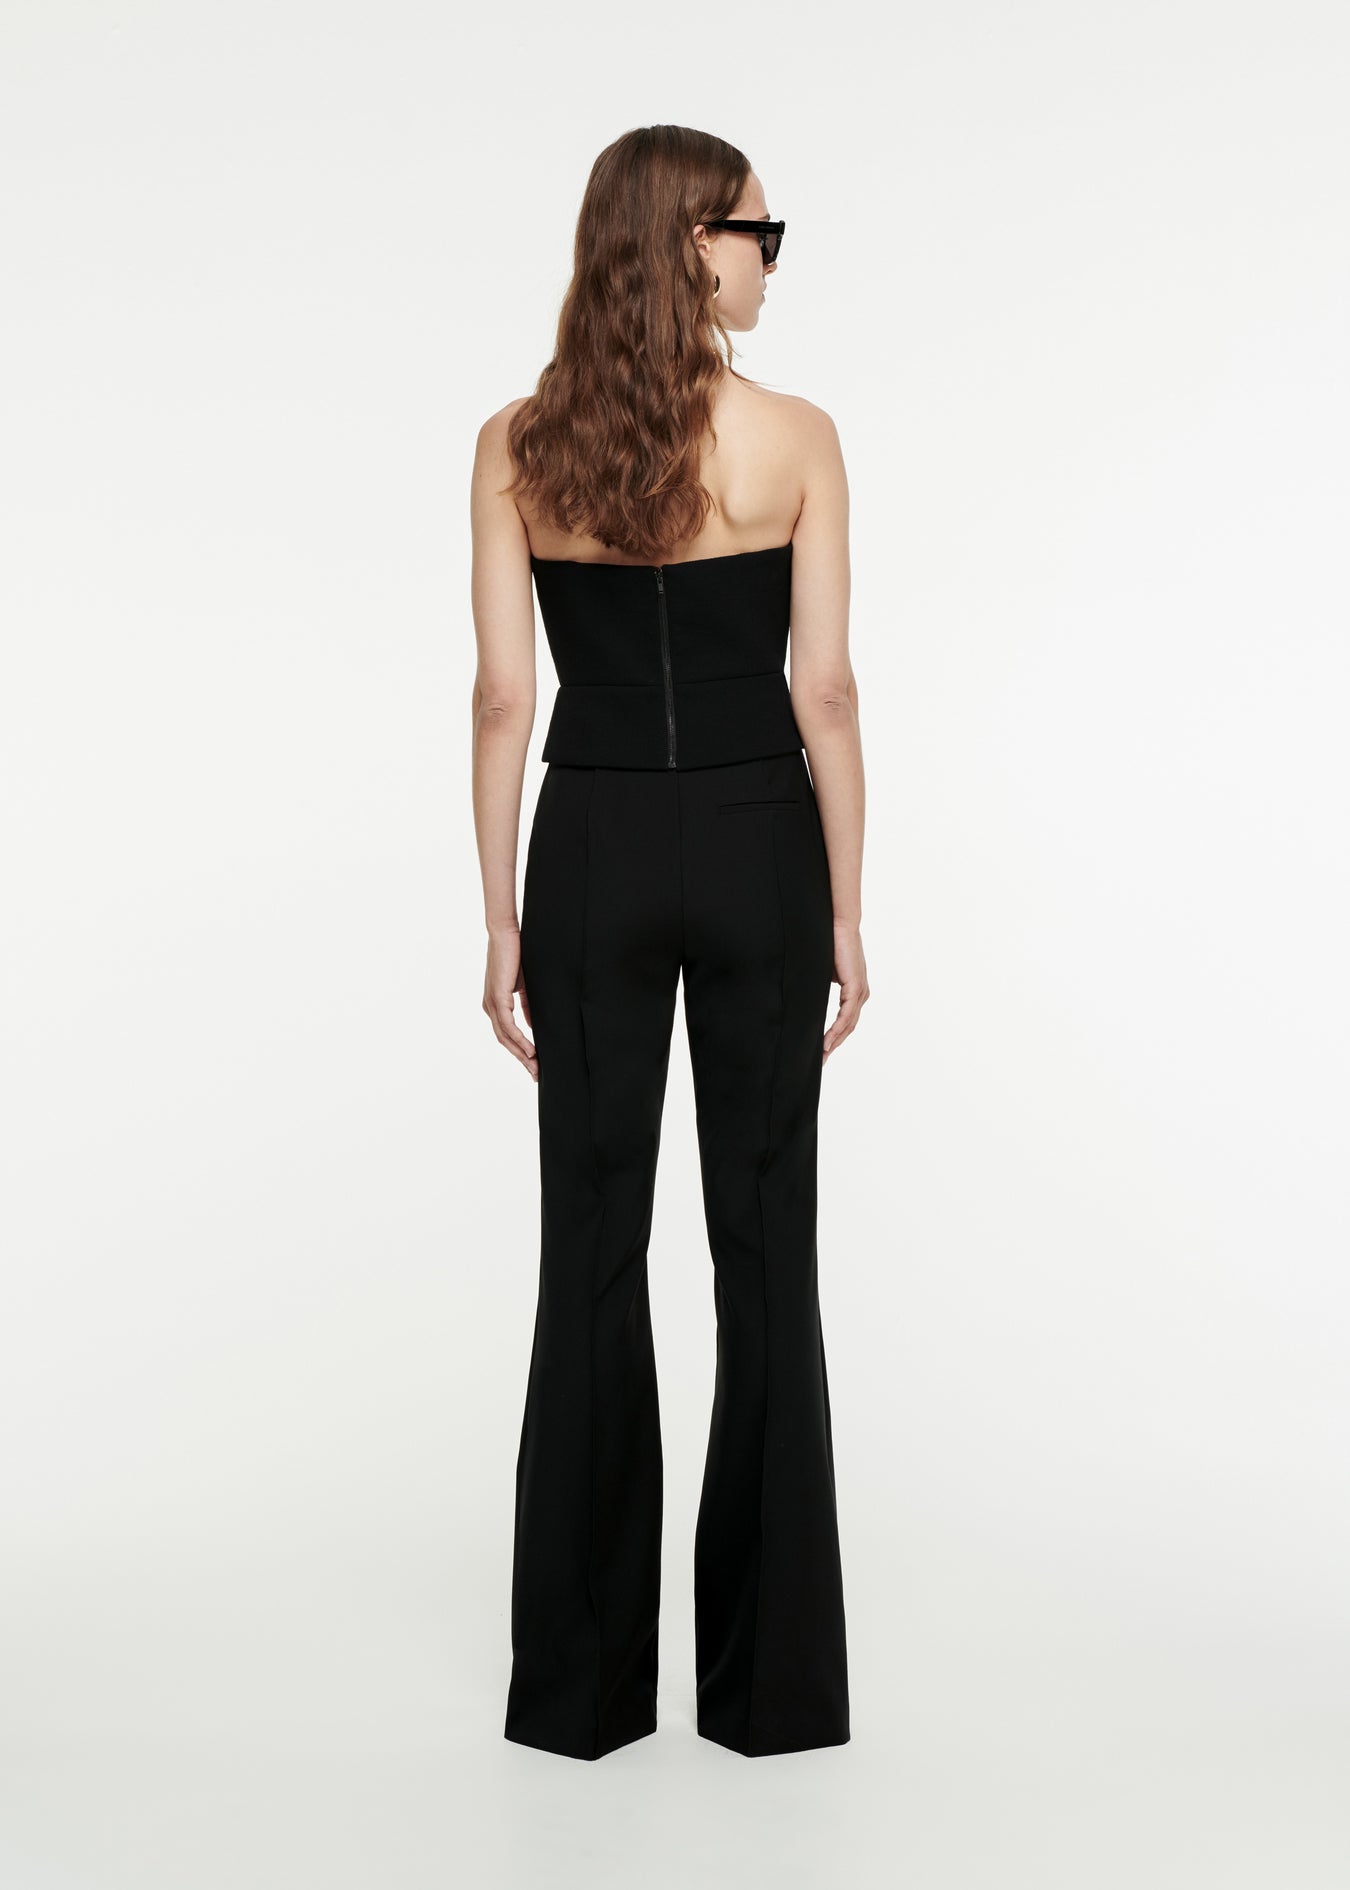 The back of a woman wearing the Asymmetric Wool Crepe Top in Black 